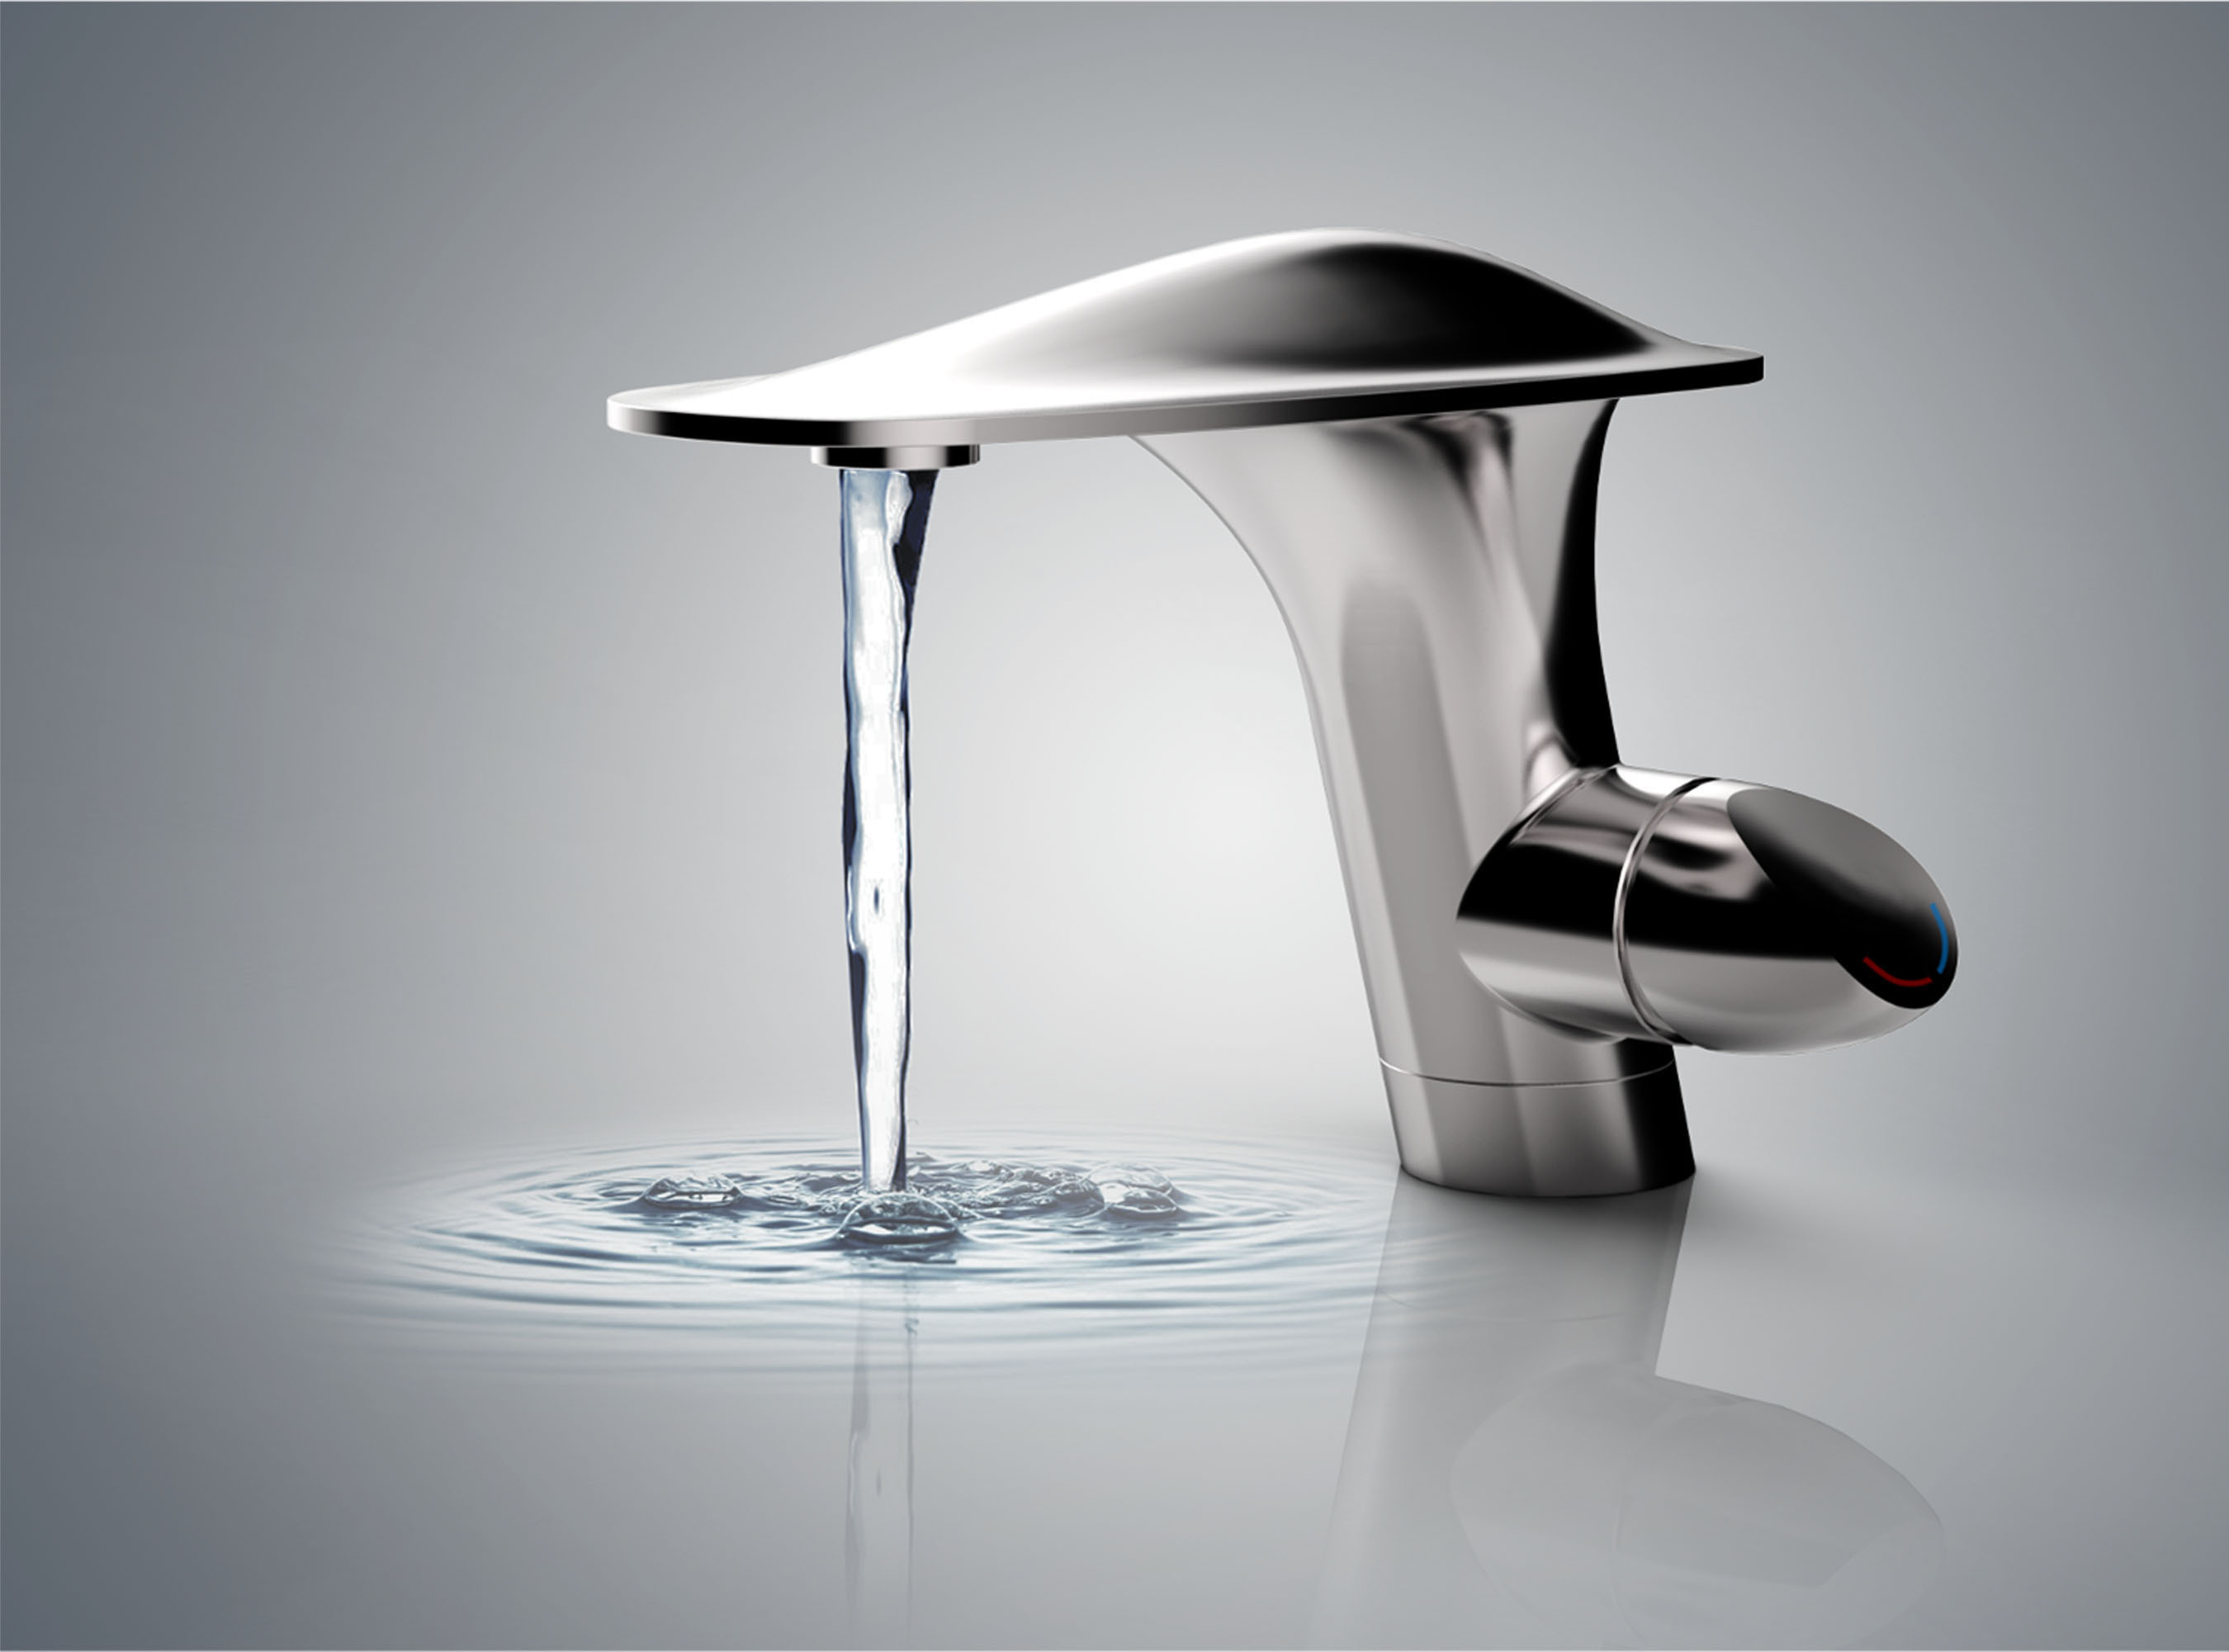 Newly designed stainless steel faucet from SUPOR. (PRNewsFoto/SUPOR KITCHEN & BATH CO.,LTD) (PRNewsFoto/SUPOR KITCHEN _ BATH CO__LTD)